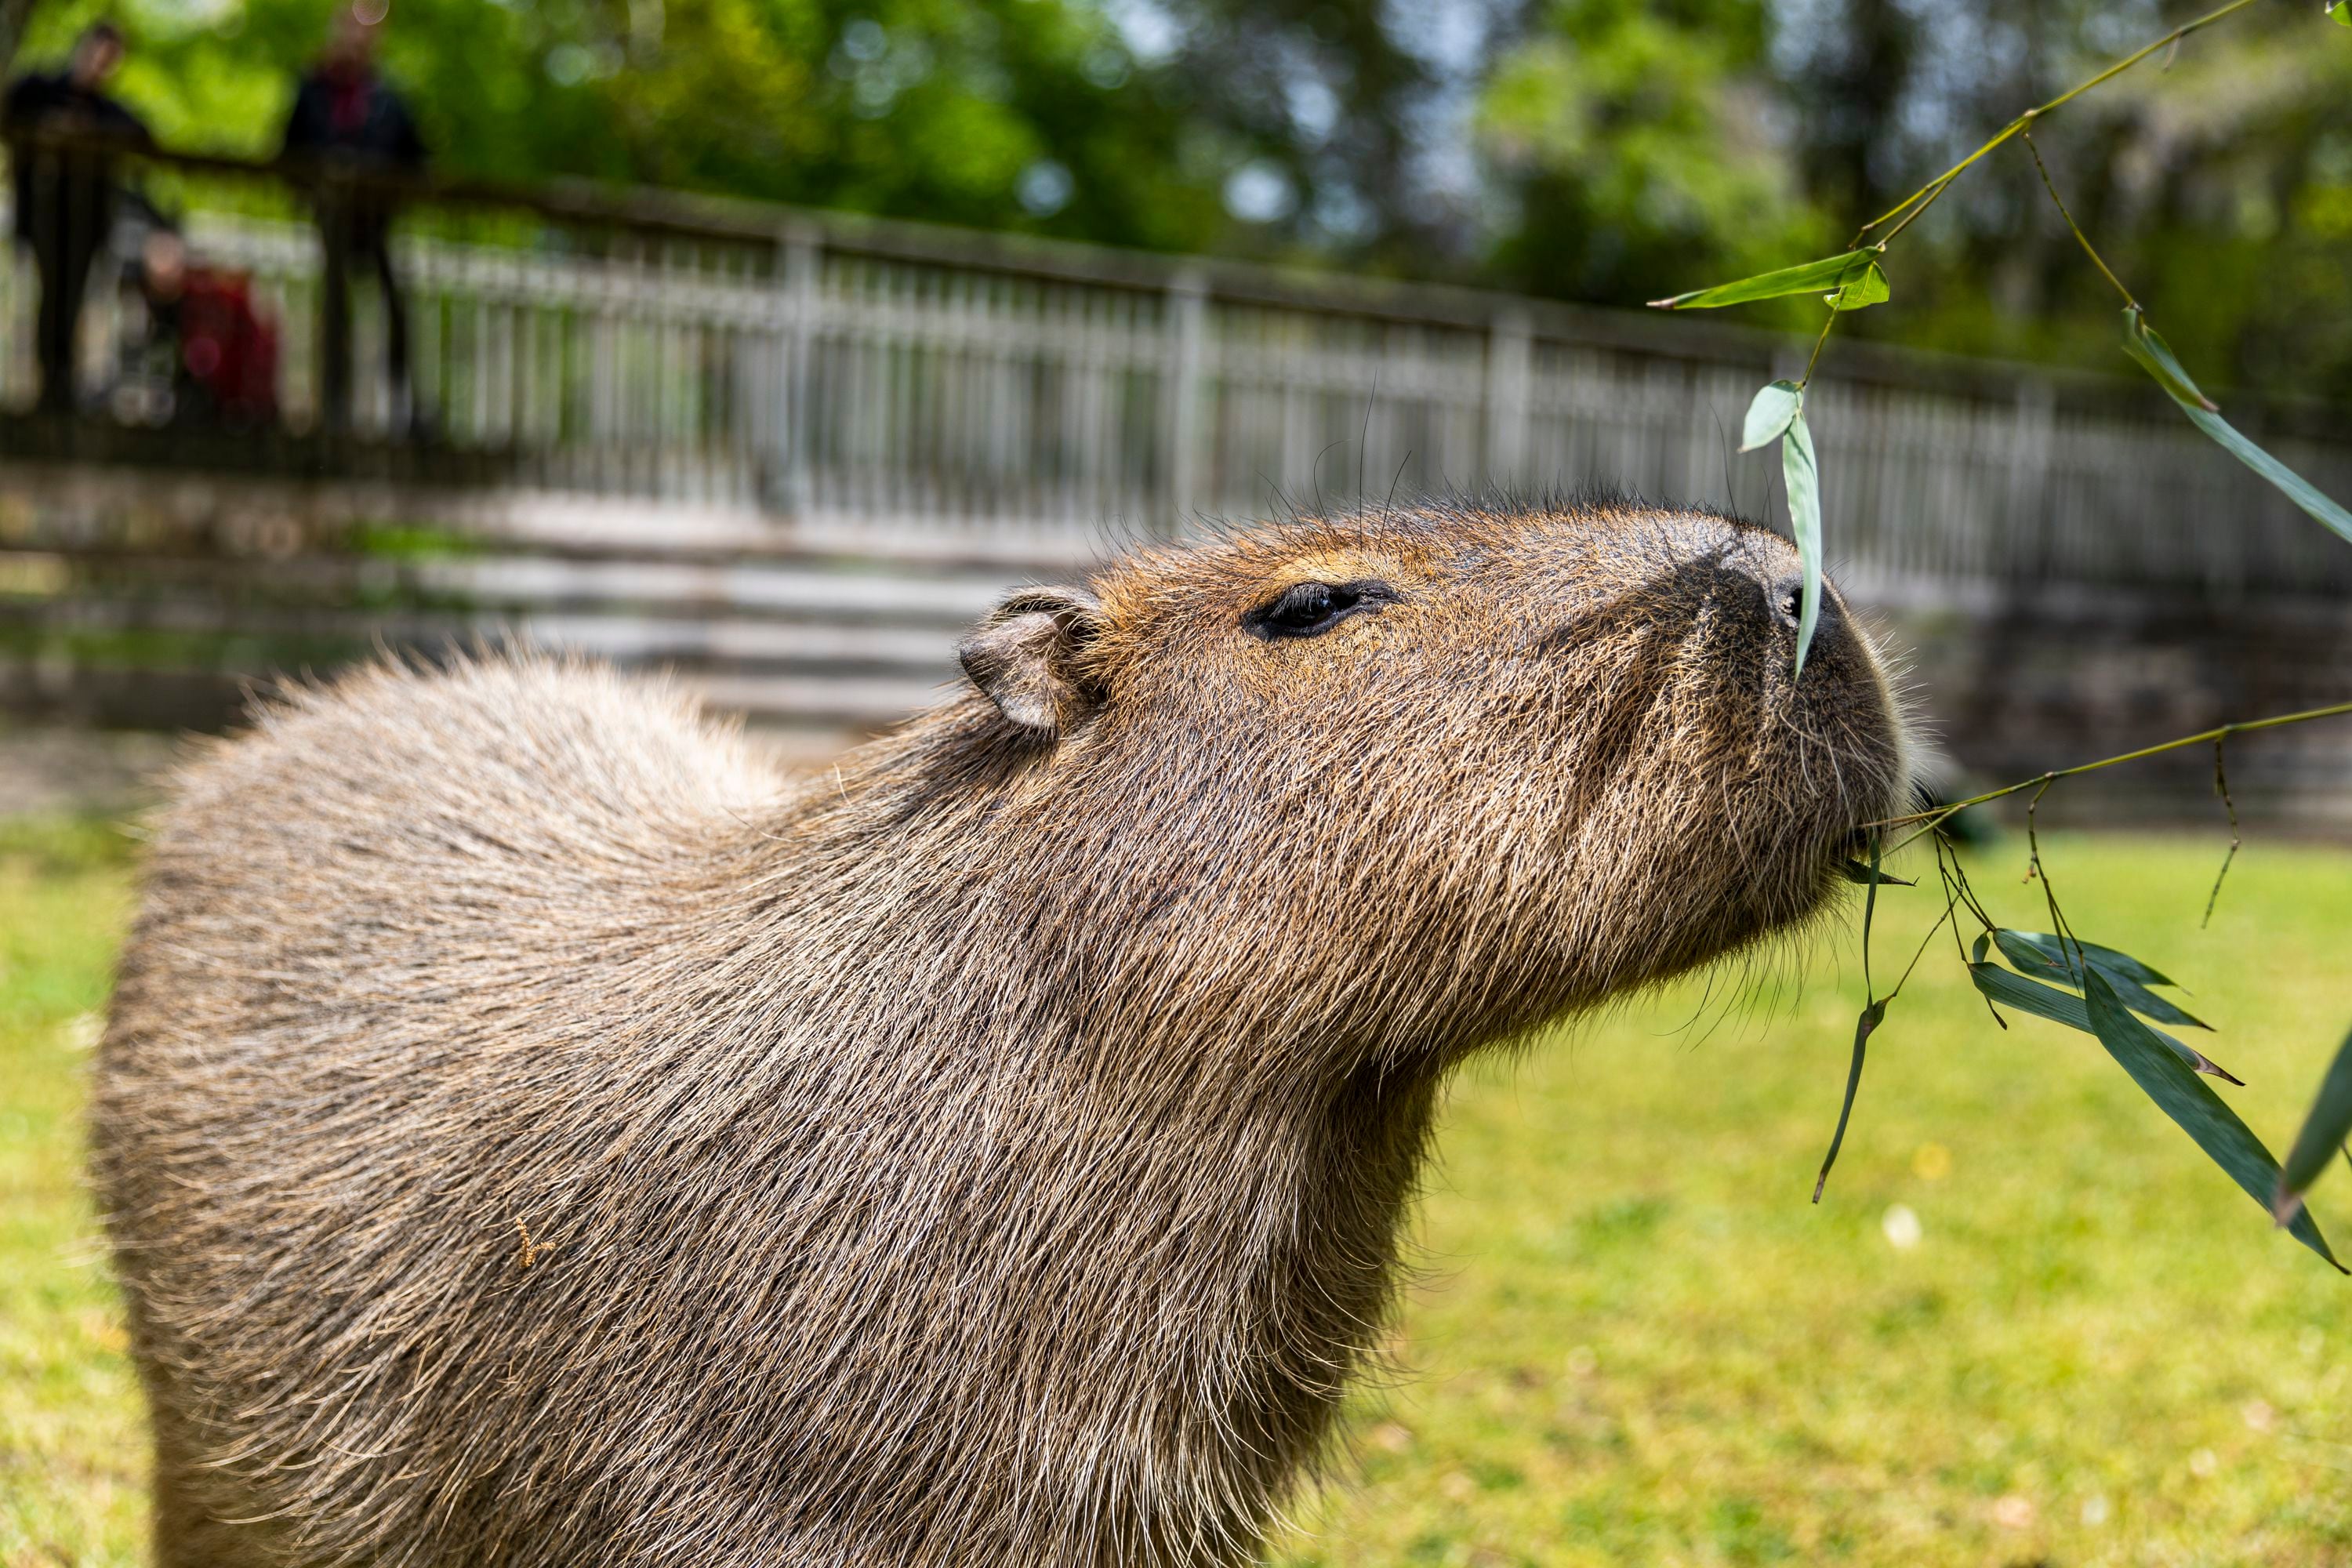 Meet the Capybaras at the Cape May Zoo